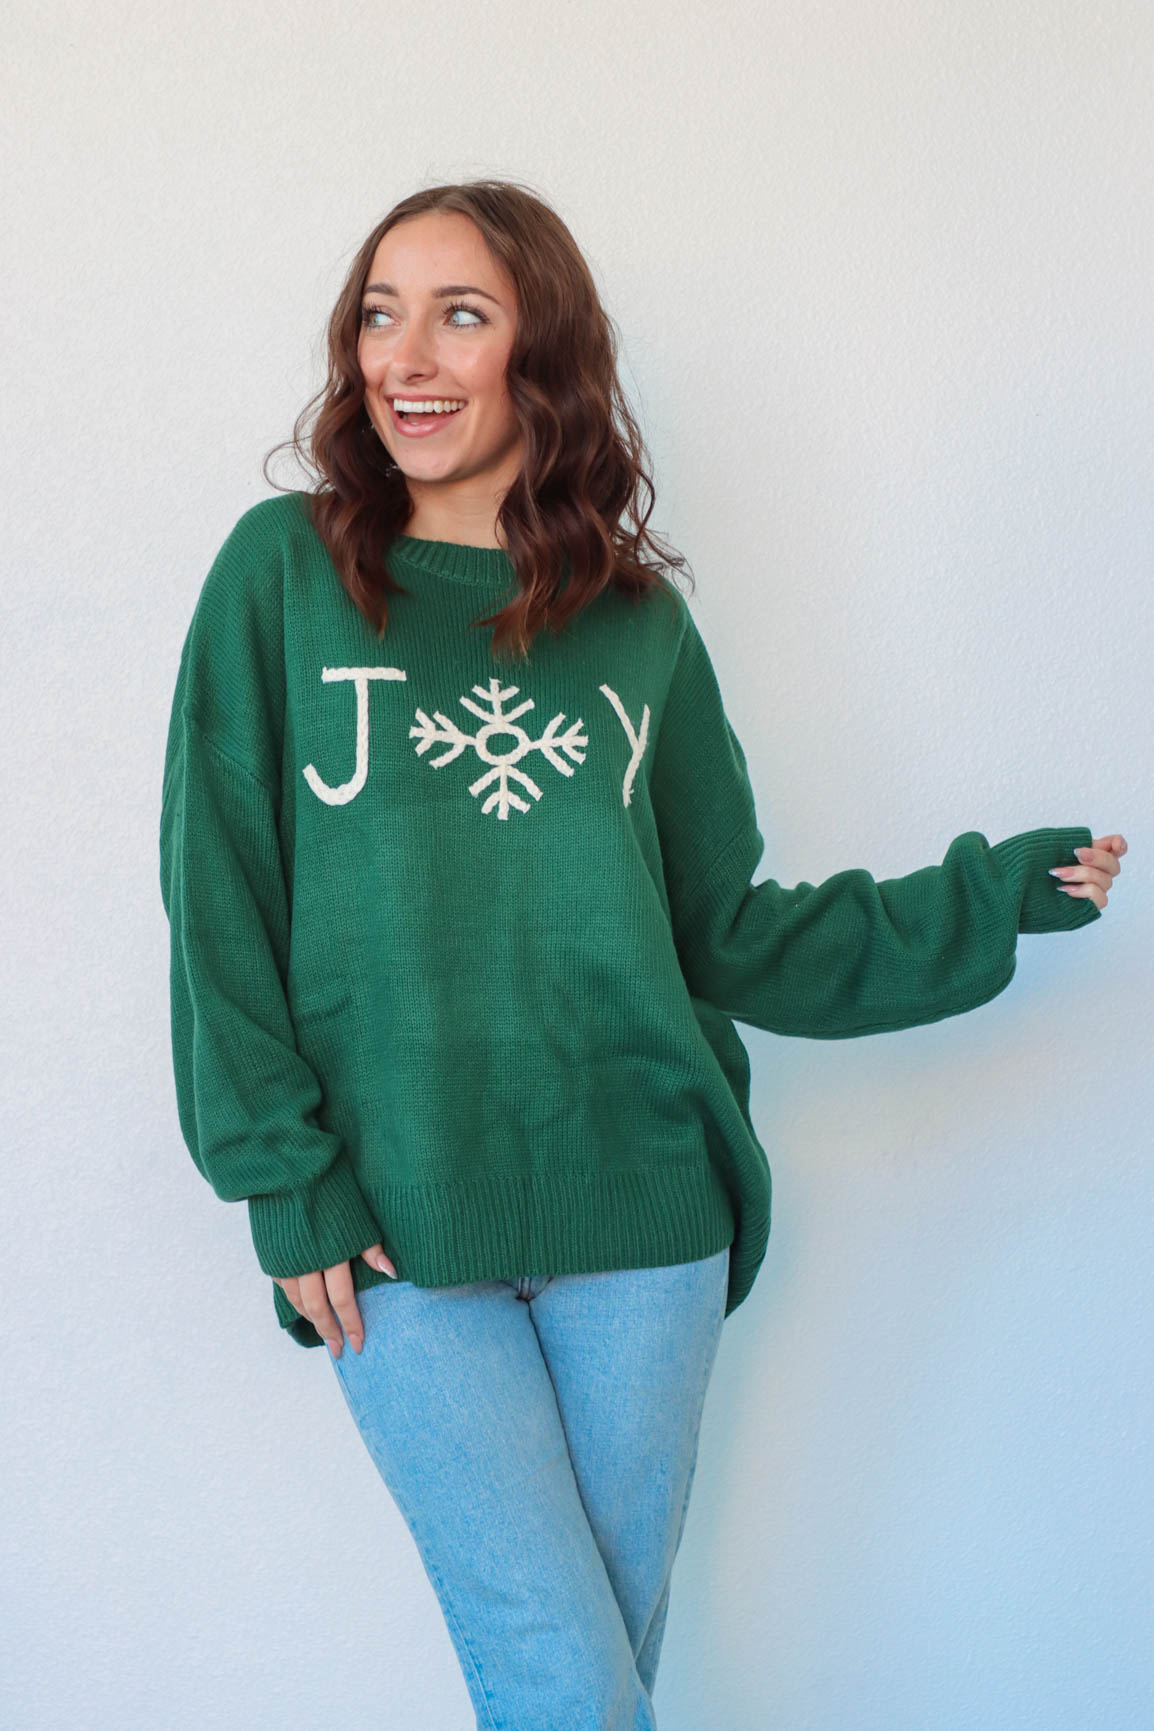 girl wearing green christmas sweater with "joy" graphic